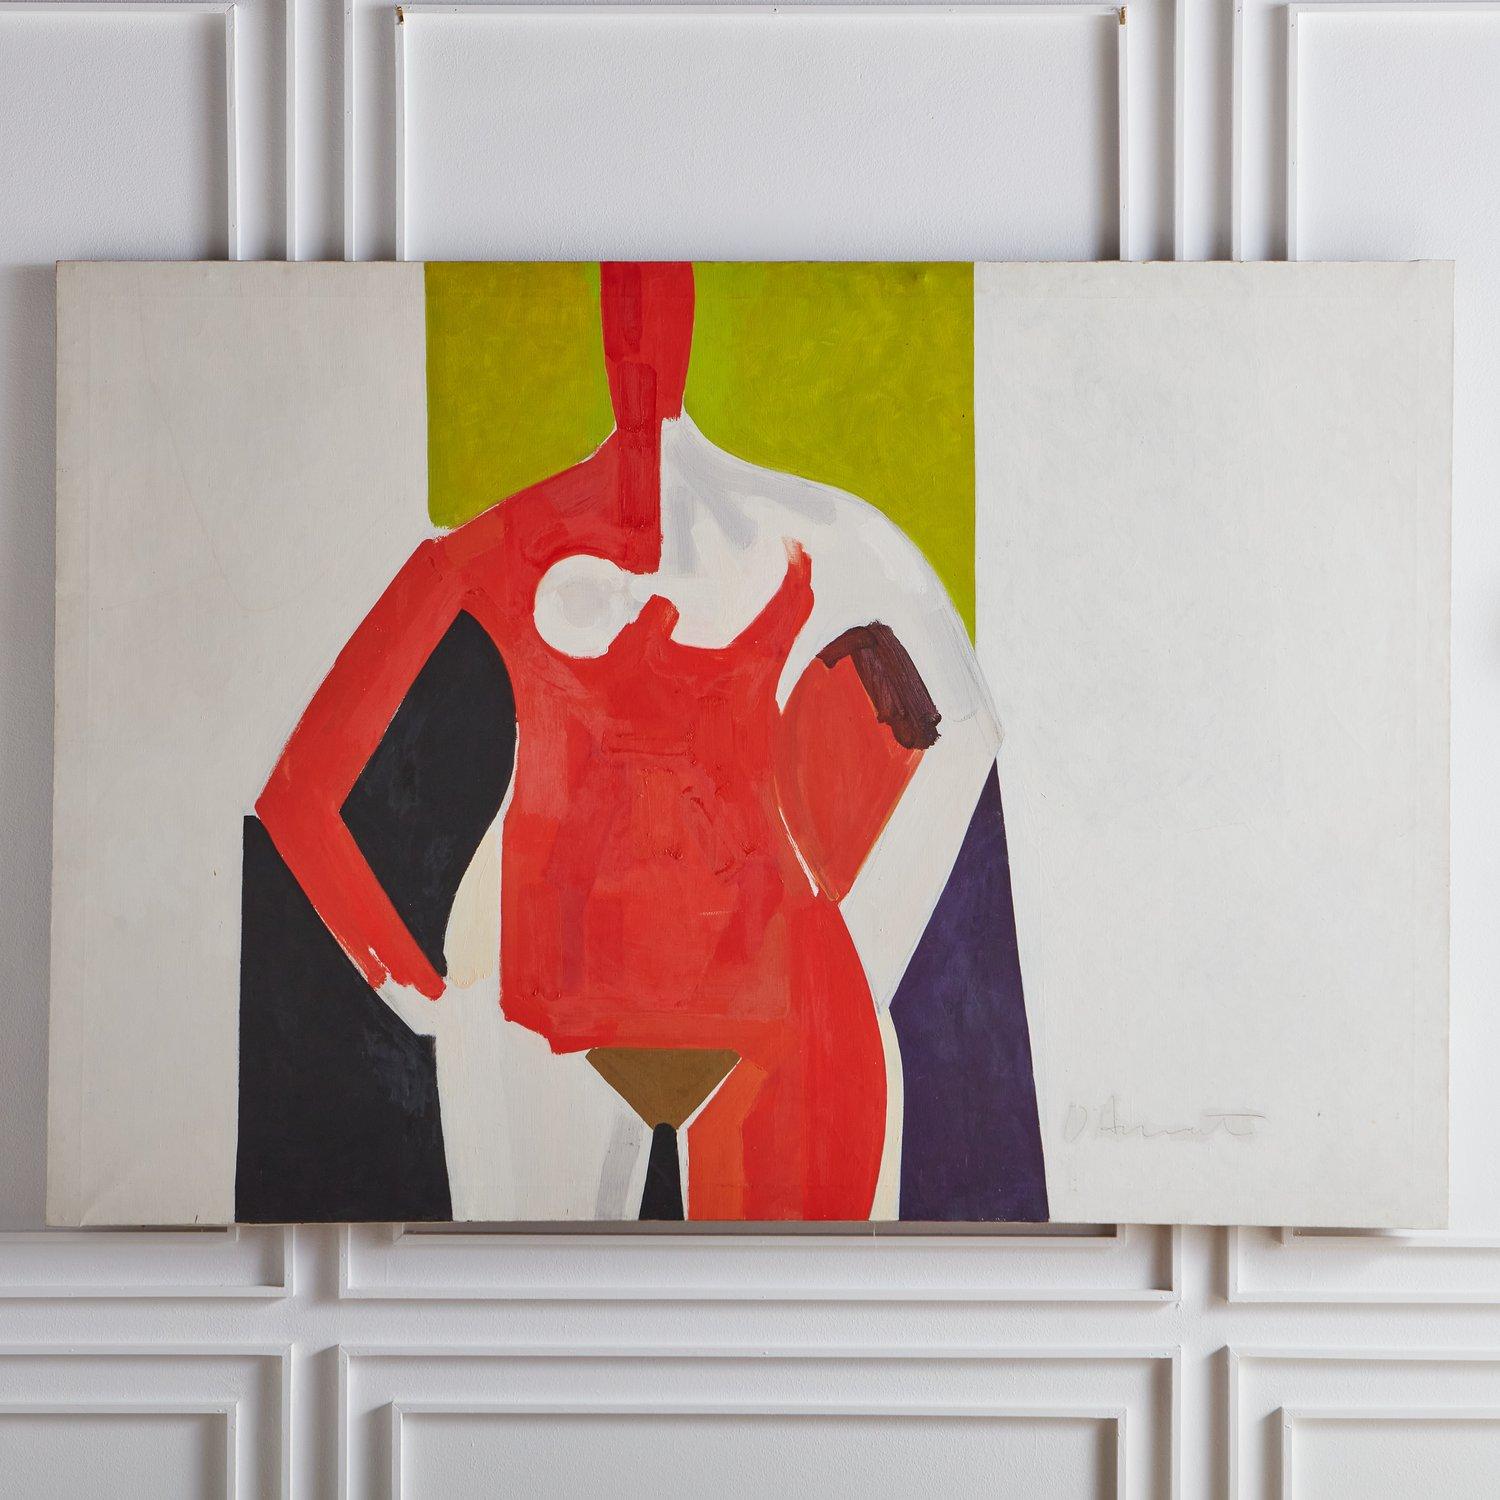 A large figural modernist painting on canvas by George D’Amato, 1990s. This gorgeous artwork features vibrant red, green and black hues. Artist signature on the lower right.

George D’Amato was an award winning American art director who sold in